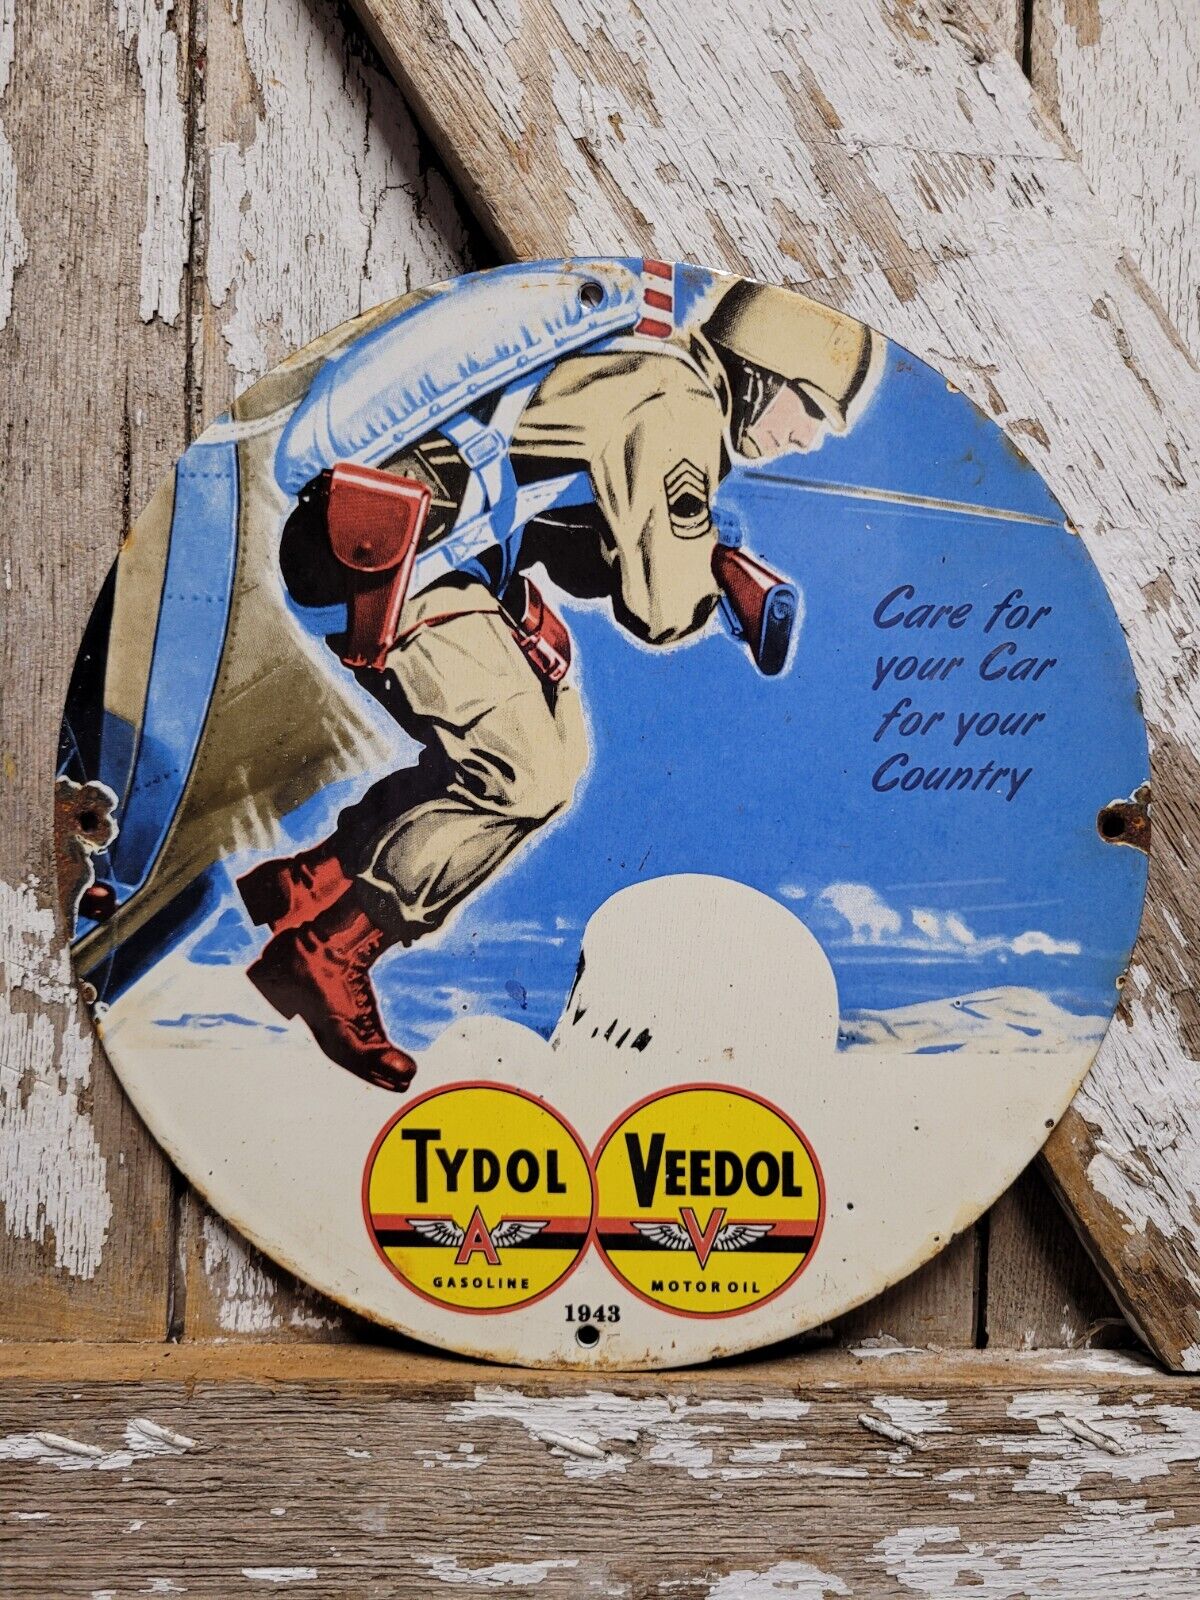 VINTAGE VEEDOL PORCELAIN SIGN TYDOL ARMY MILITARY HELICOPTER AIR FORCE OIL GAS